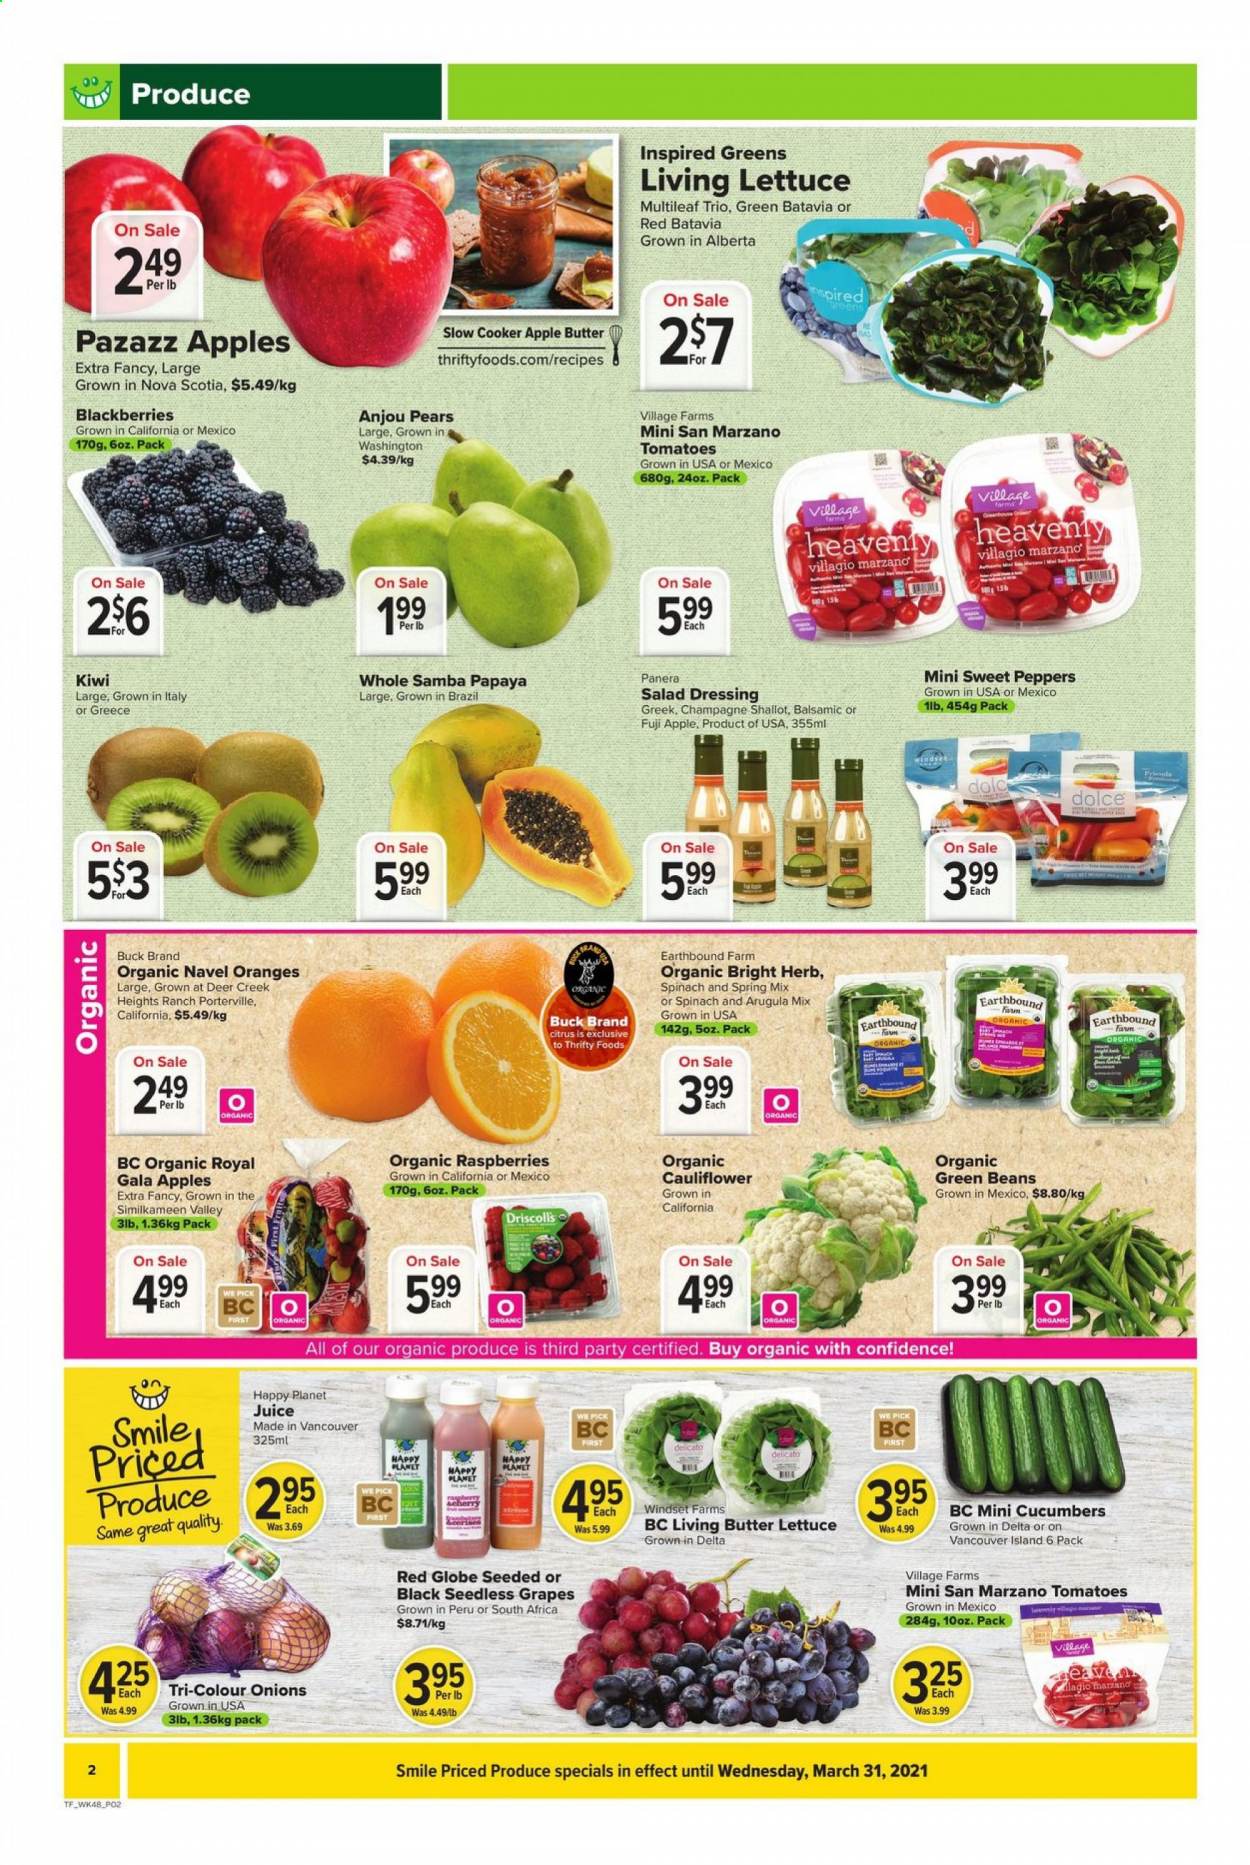 thumbnail - Thrifty Foods Flyer - March 25, 2021 - March 31, 2021 - Sales products - arugula, beans, butter lettuce, cauliflower, green beans, spinach, sweet peppers, tomatoes, onion, lettuce, peppers, blackberries, Gala, grapes, Red Globe, seedless grapes, papaya, pears, Fuji apple, oranges, navel oranges, salad dressing, dressing, apple butter, juice, kiwi, champagne. Page 2.